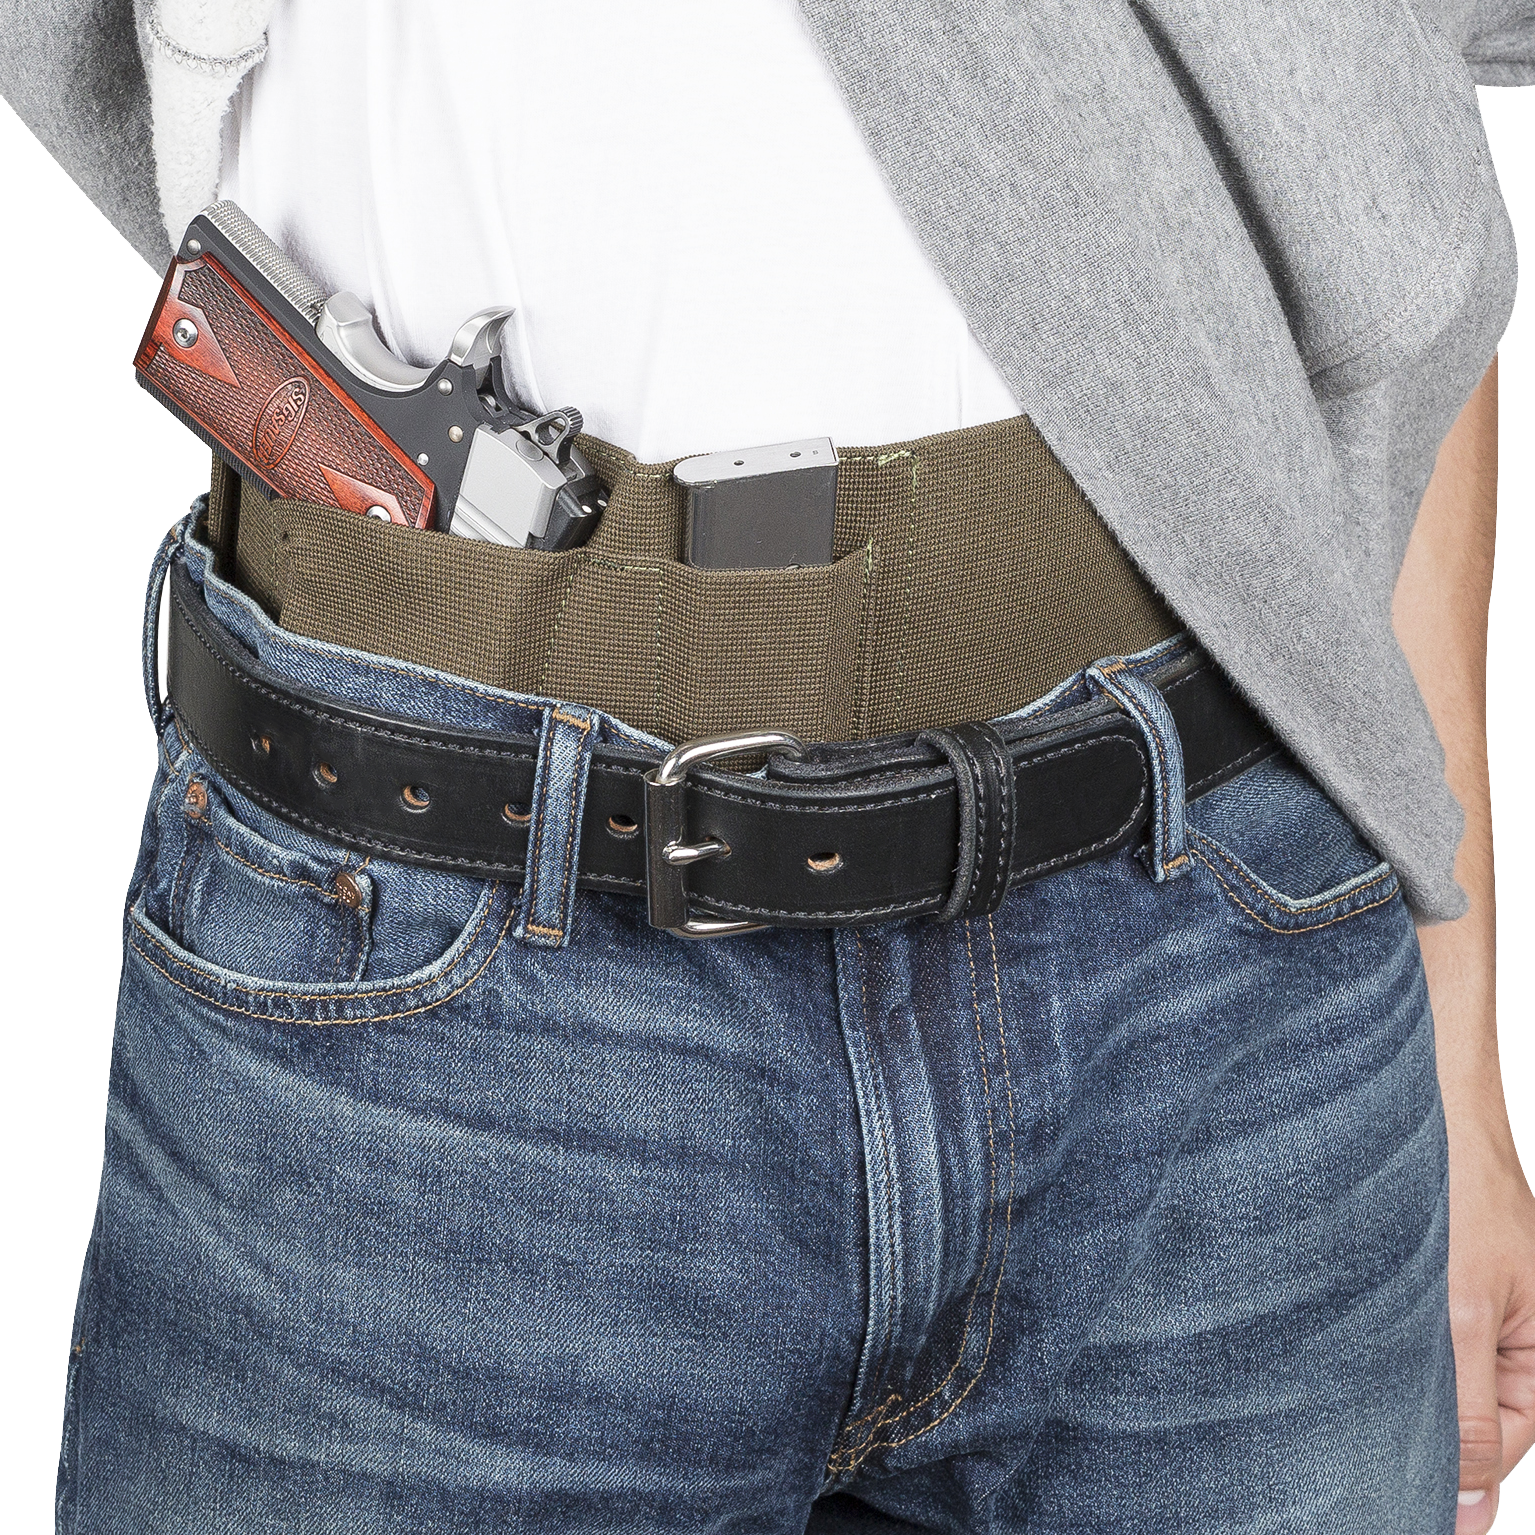 Tactical Belly Band Gun Holster Concealed Carry Waist Band Pistol